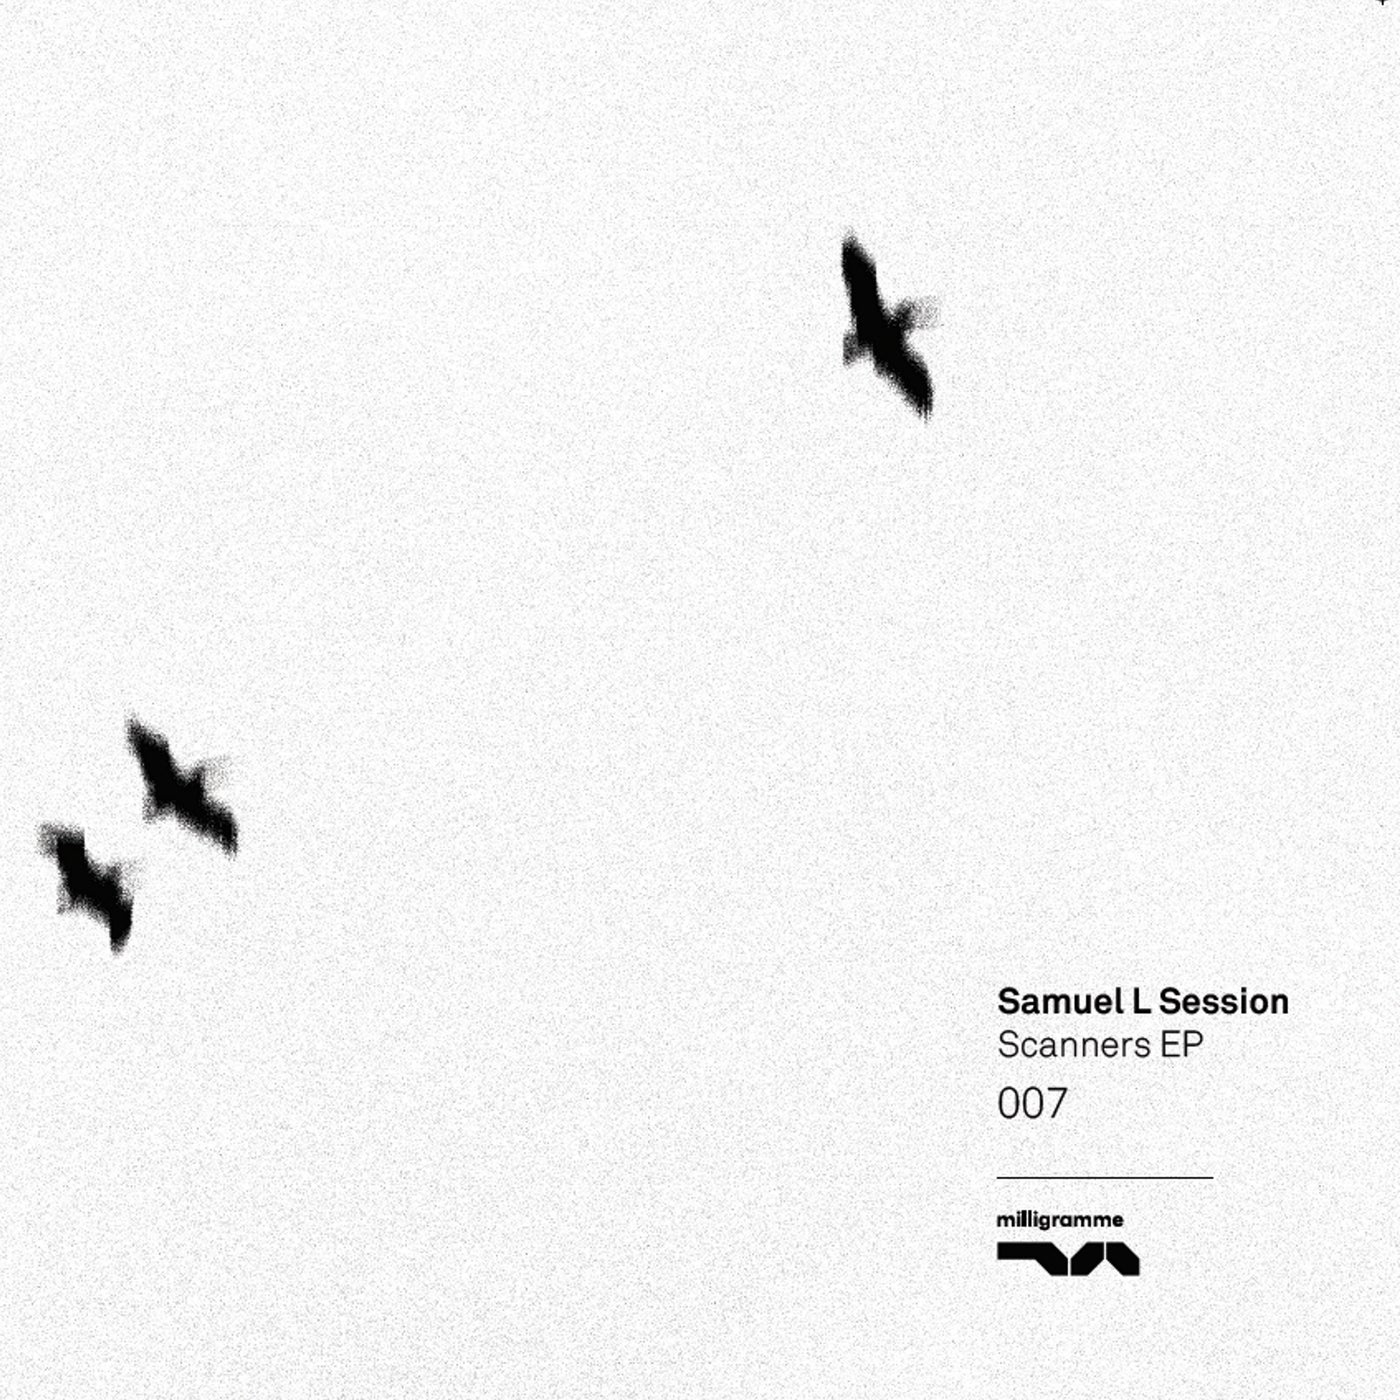 image cover: Samuel L Session - Scanners / MILLIGRAMME007